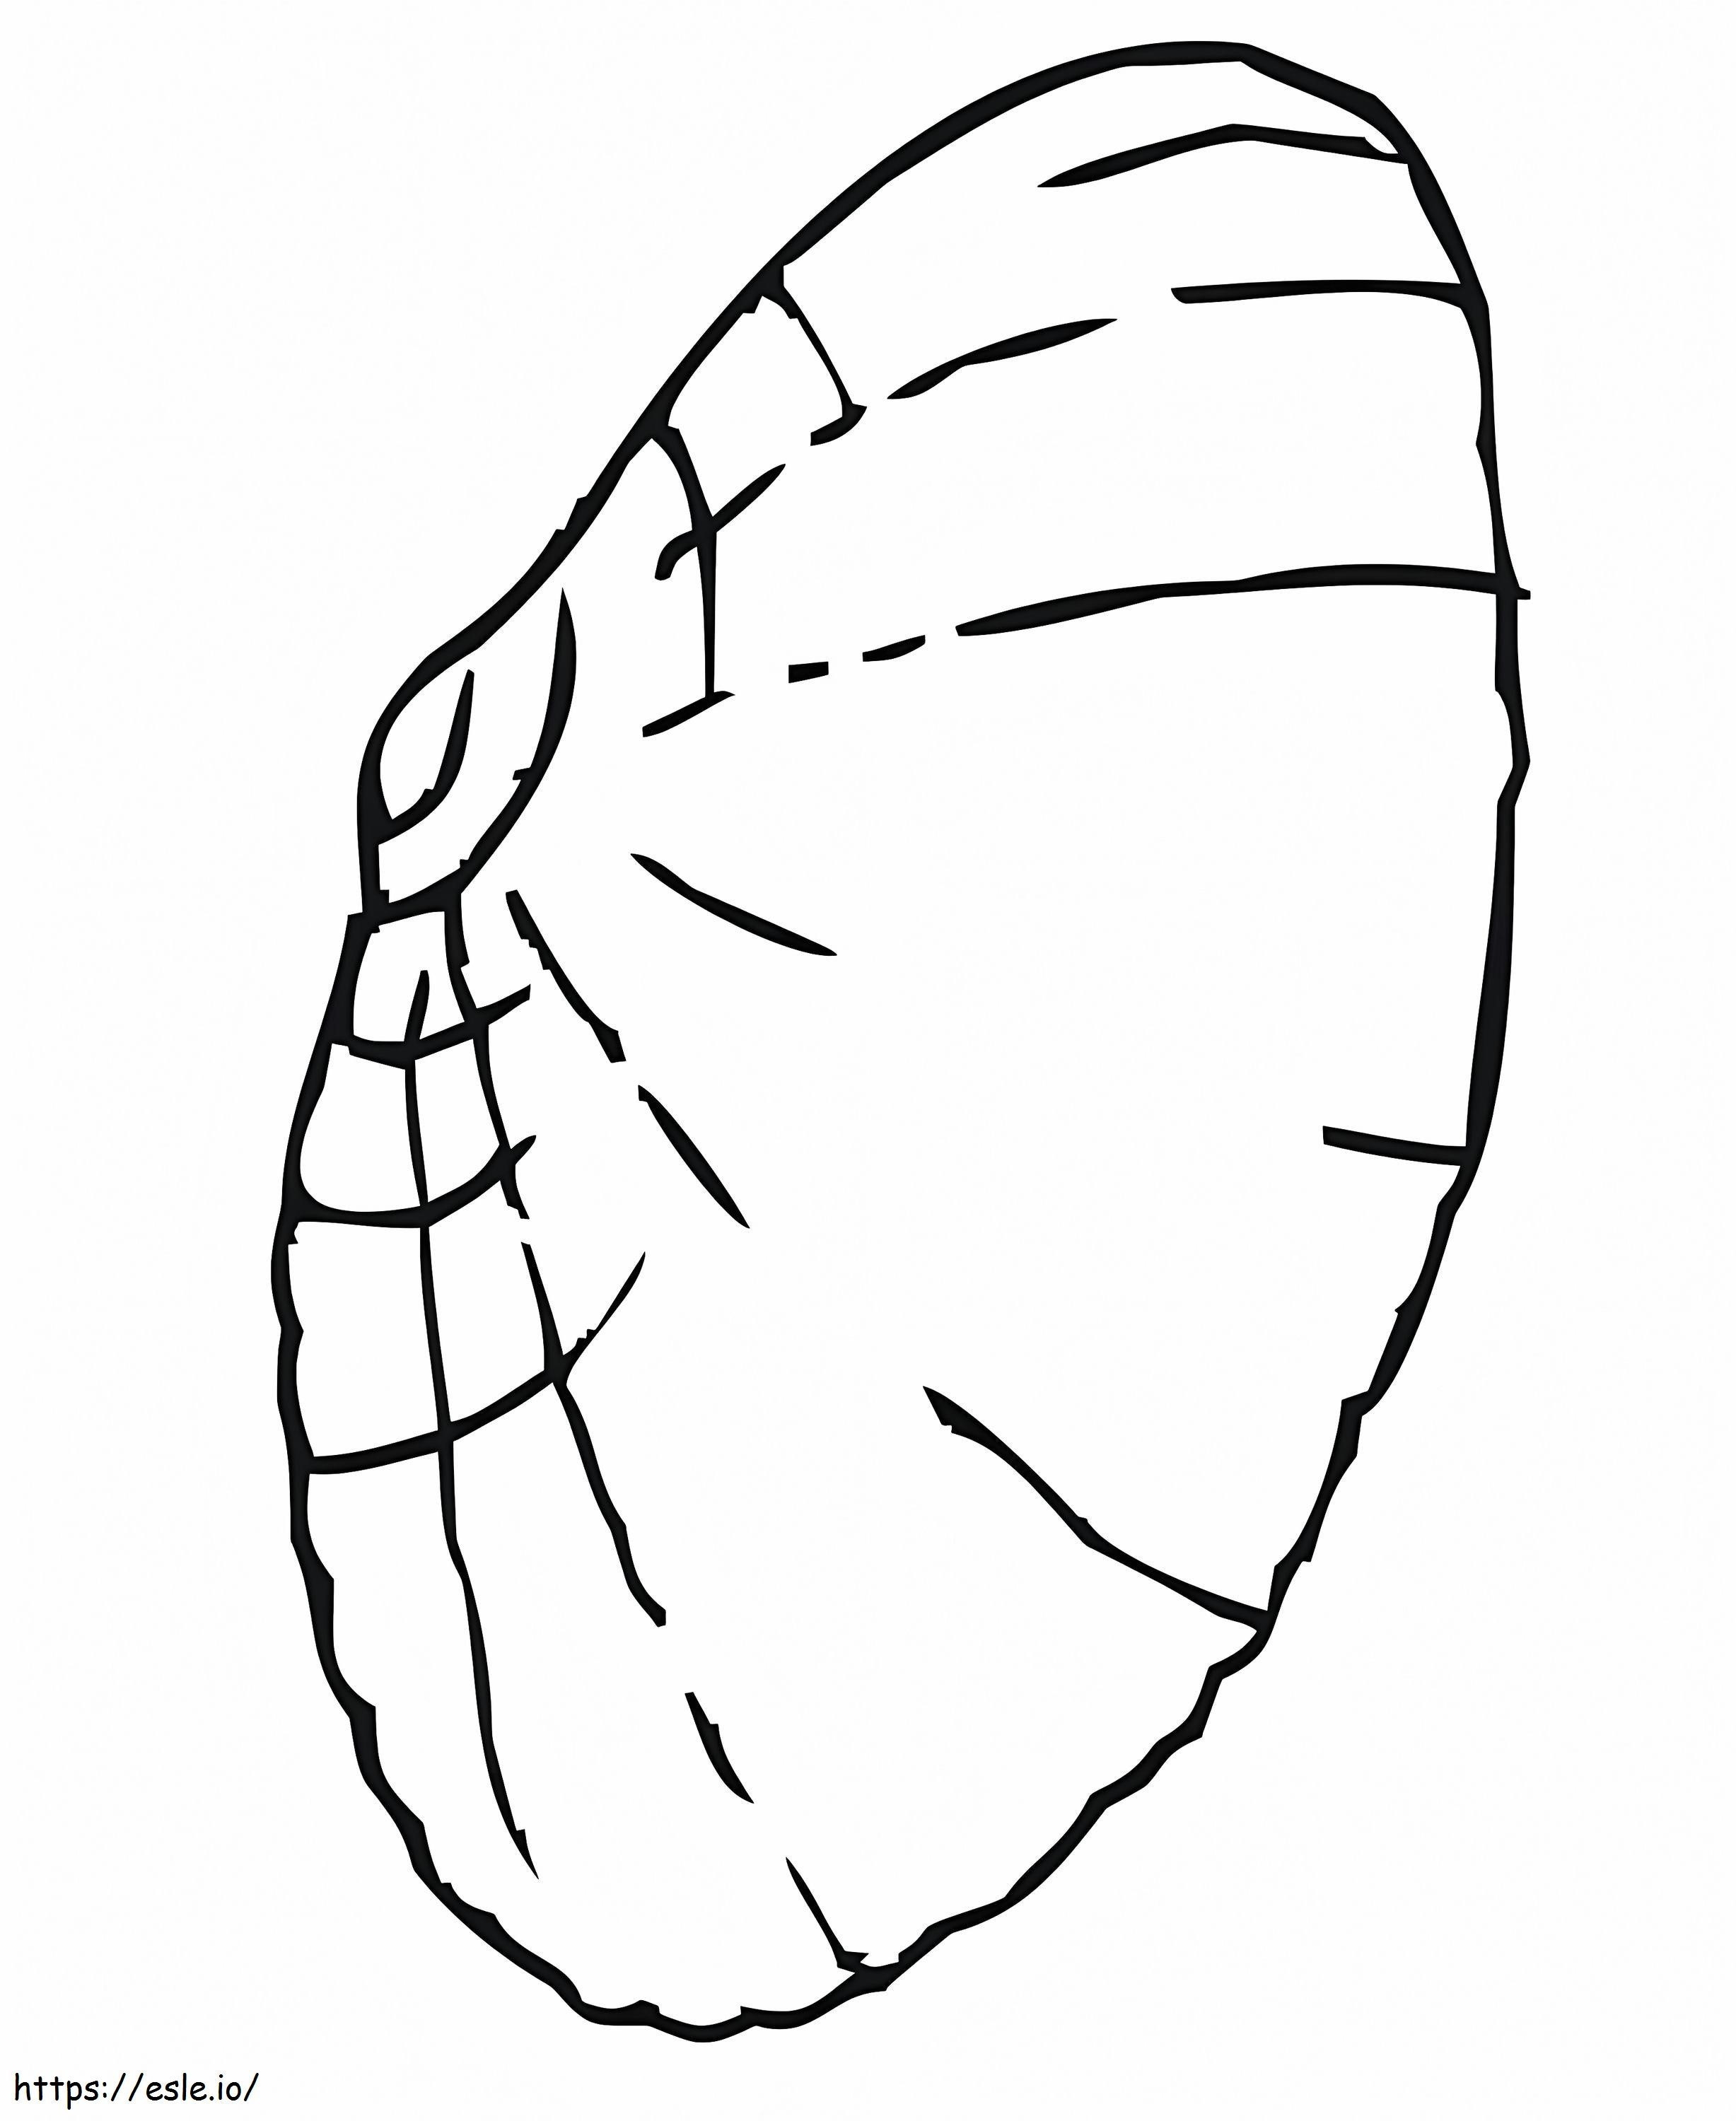 Normal Clam Shell coloring page